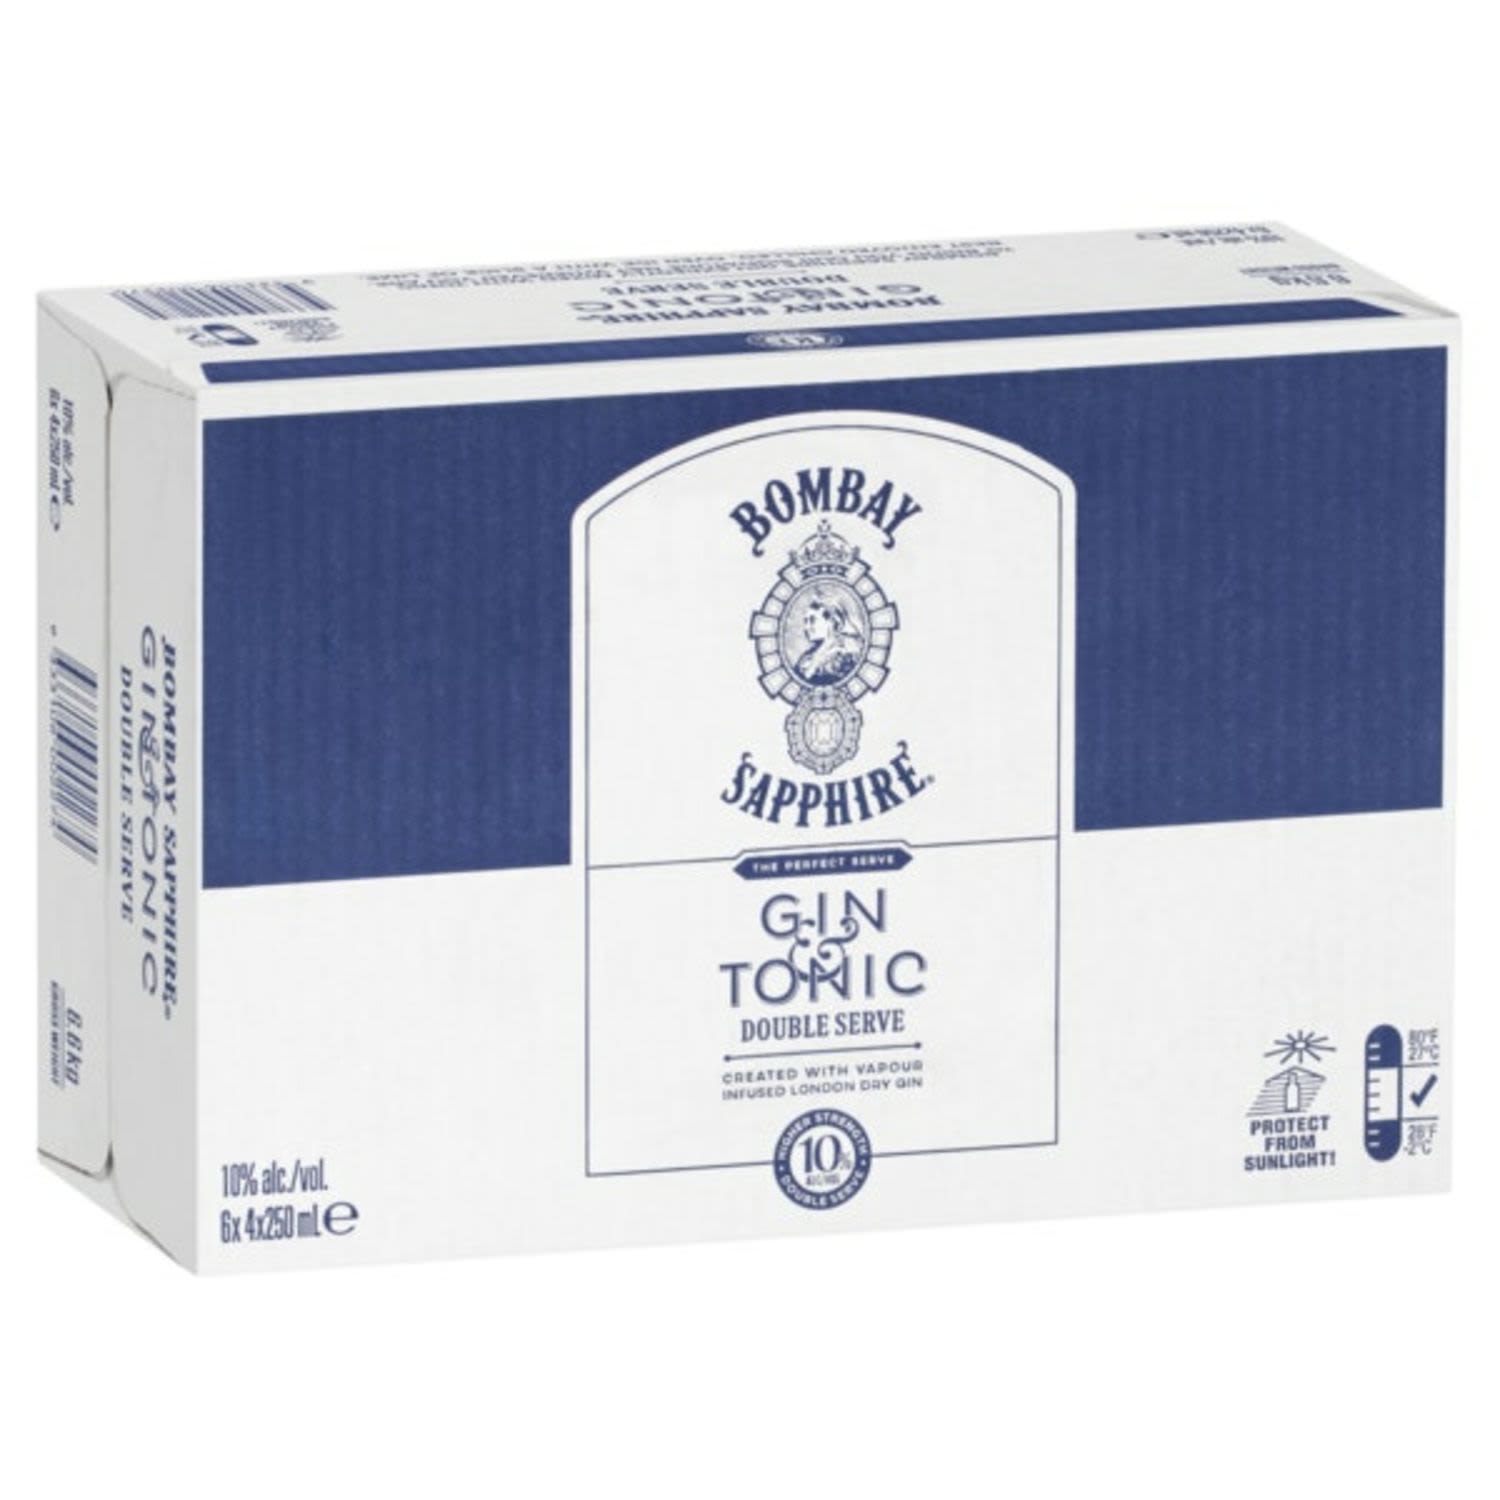 A double serve of Bombay Sapphire gin mixed with just the right amount of tonic to deliver a refreshing citrus taste that can be enjoyed wherever you are.<br /> <br />Alcohol Volume: 10%<br /><br />Pack Format: 24 Pack<br /><br />Standard Drinks: 2<br /><br />Pack Type: Can<br />